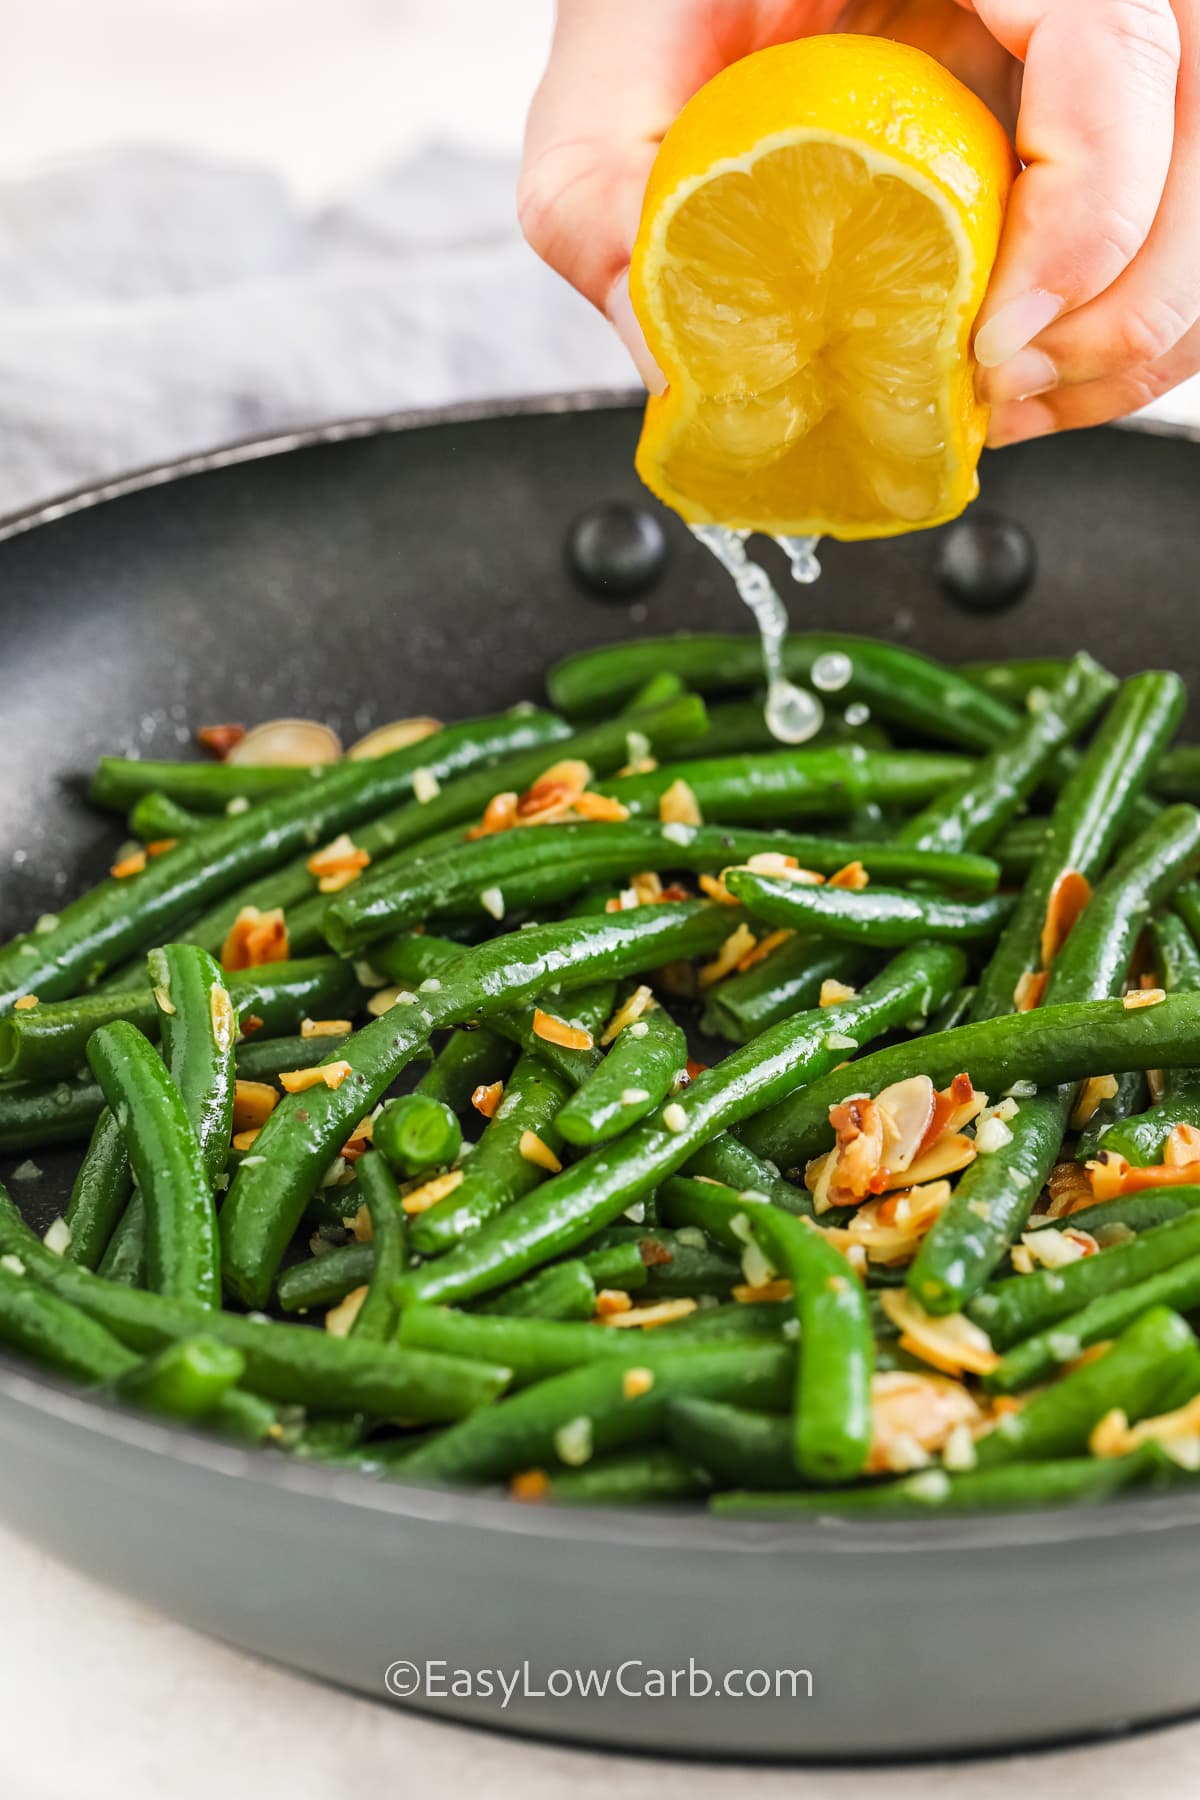 Lemon being squeezed onto prepared green beans almondine in a frying pan